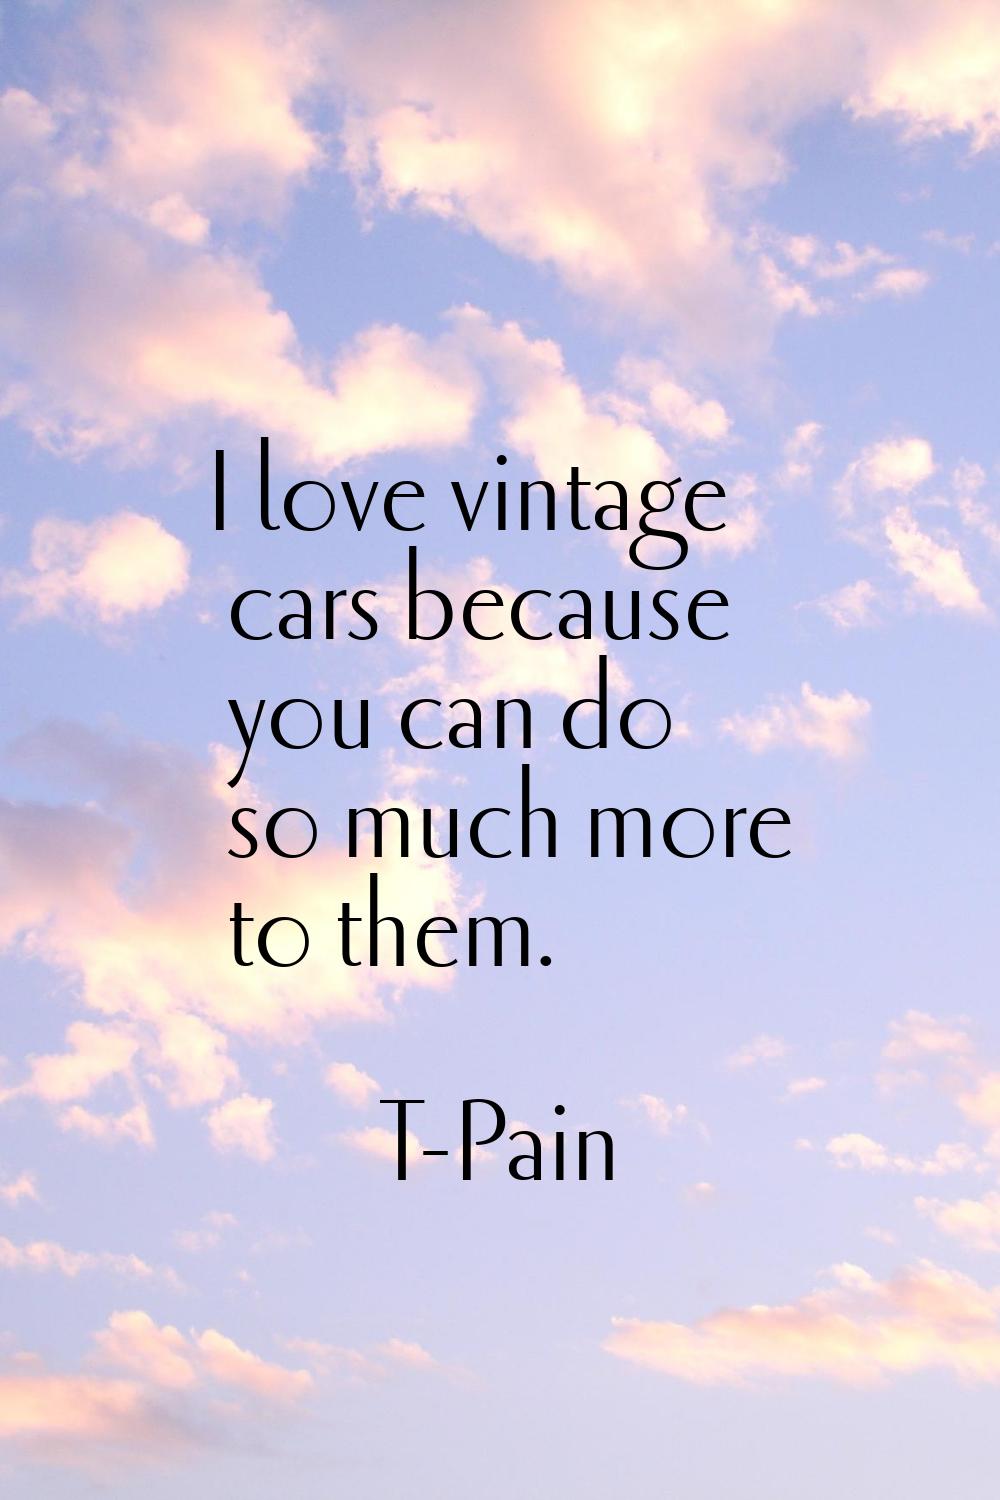 I love vintage cars because you can do so much more to them.